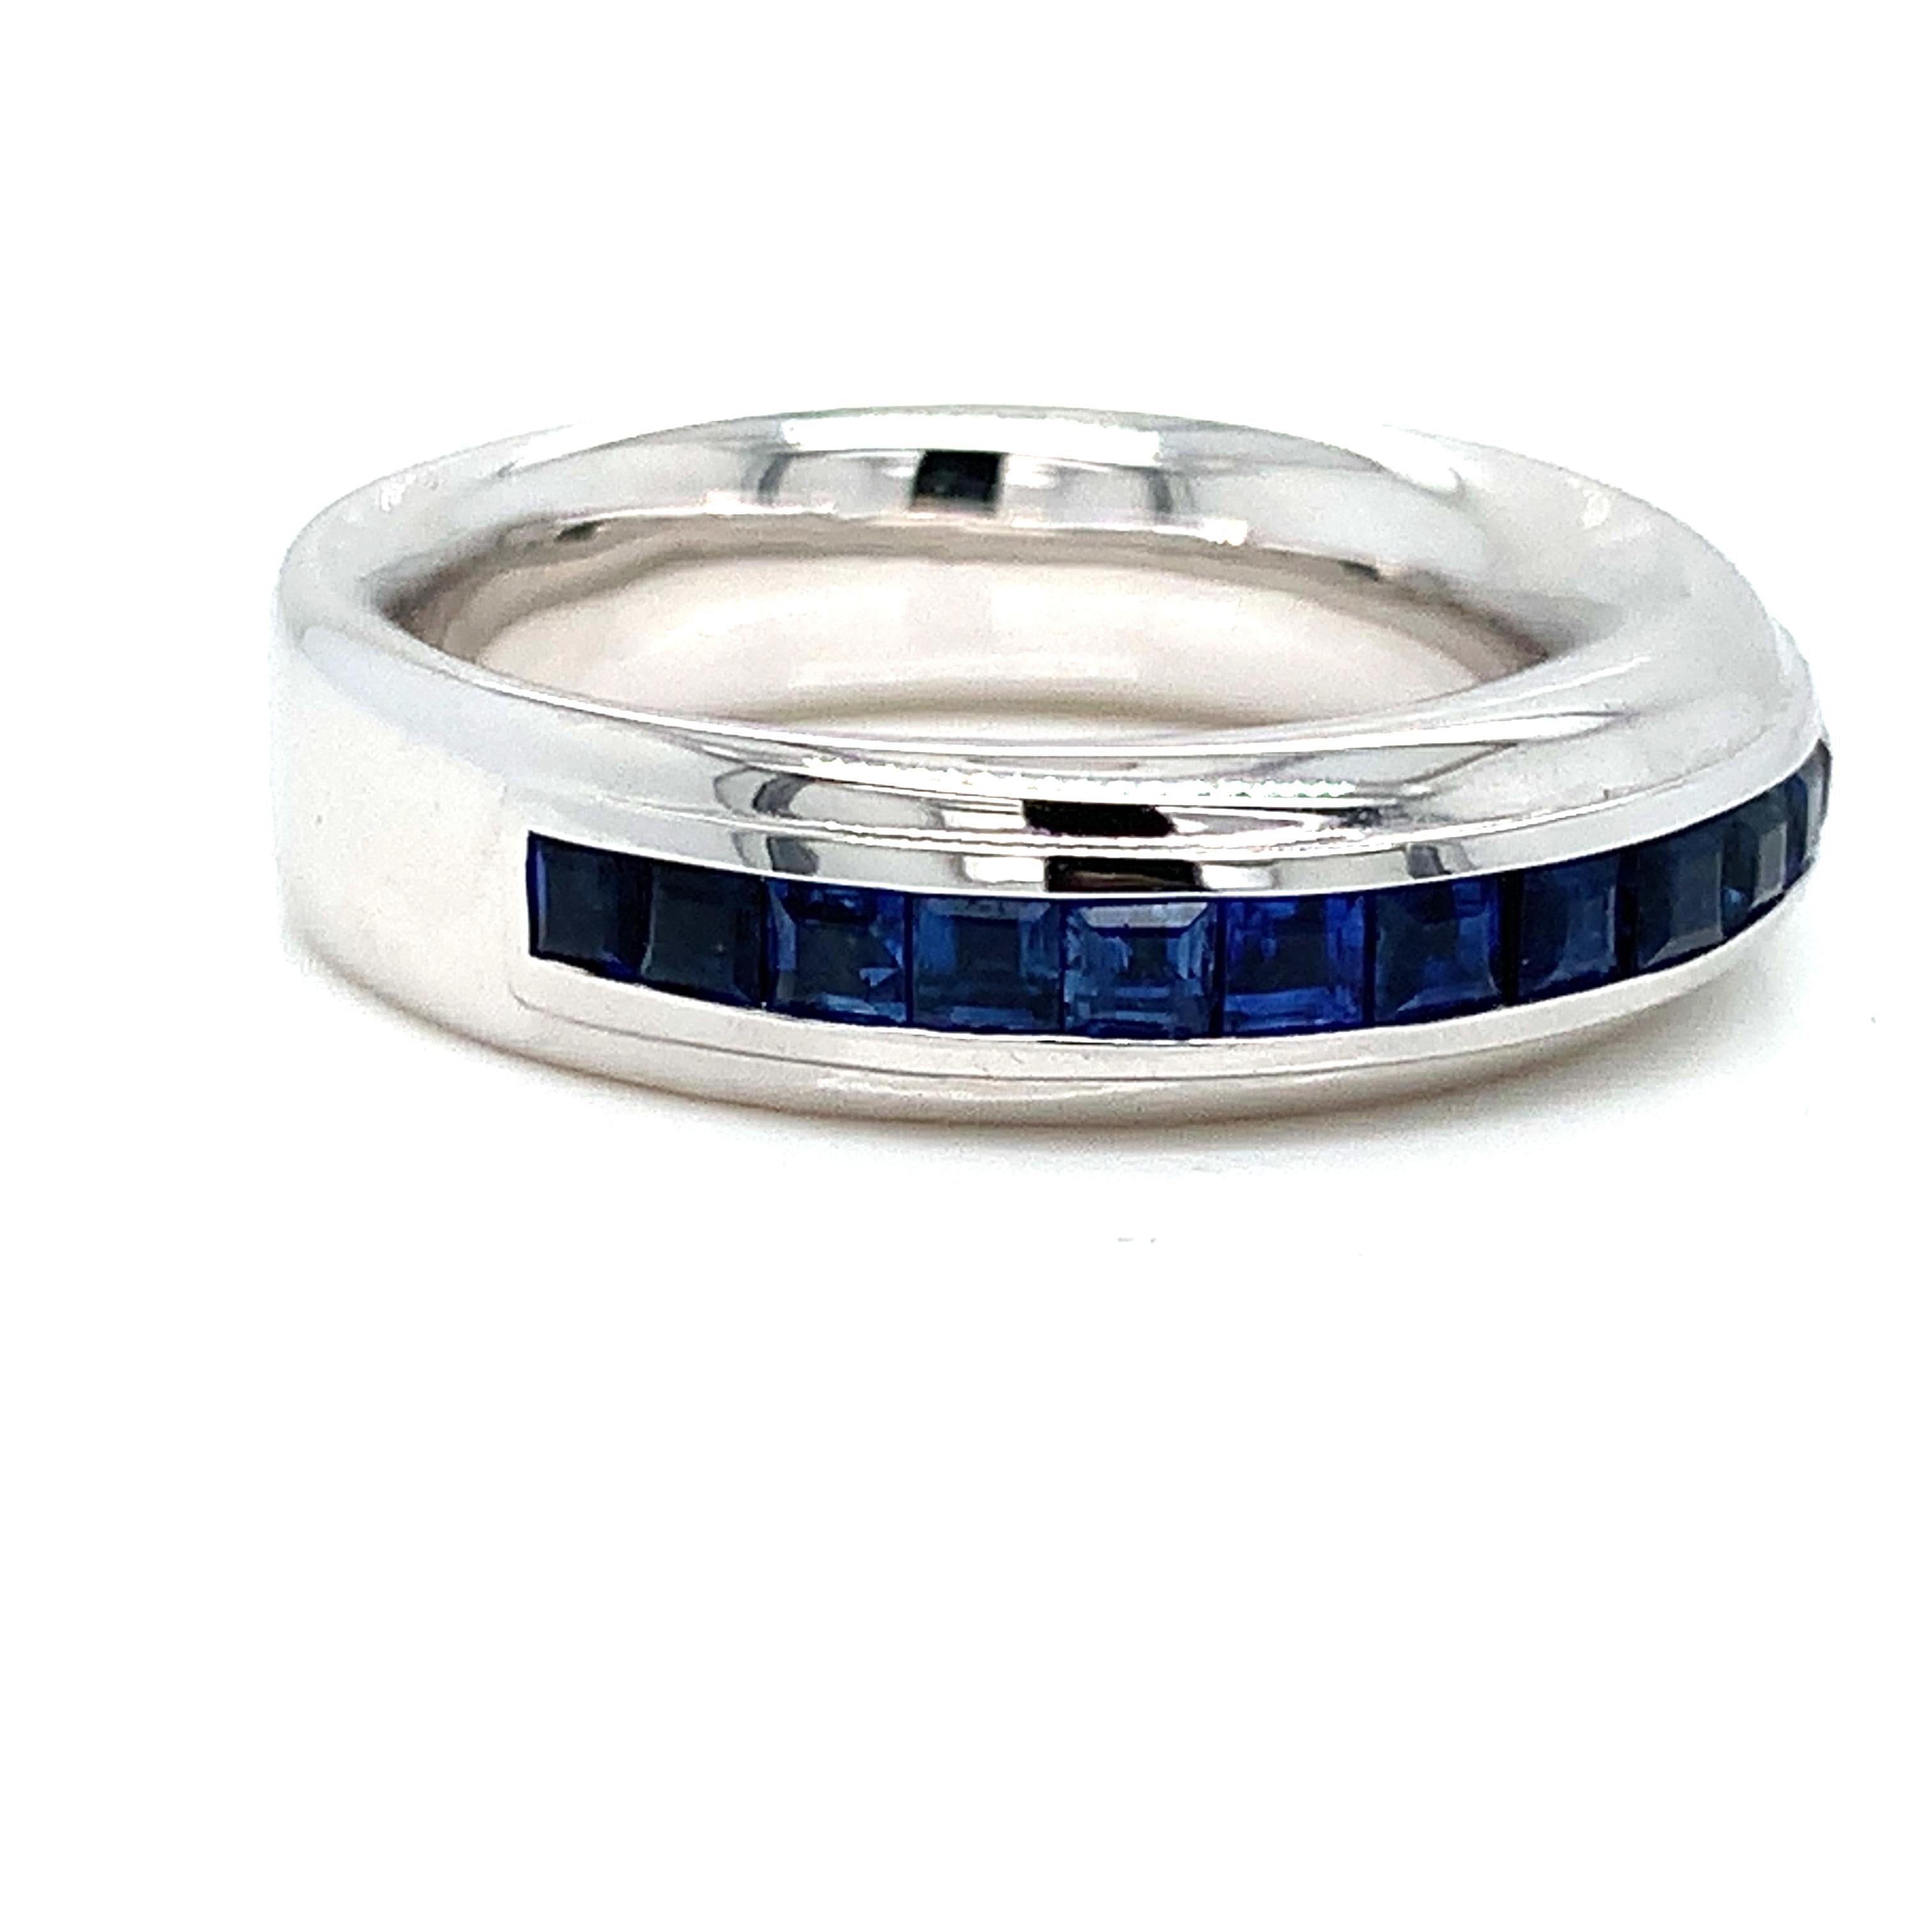 18KT White Gold Blue Sapphires Garavelli RING  Finger Size european 53 american 6.5
 Beautiful intense color carré cut blue sapphires perfectly set in white gold. 
GOLD gr : 6.60
sapphires ct : 1.46
Embrace the Timeless Beauty of Garavelli's 18KT